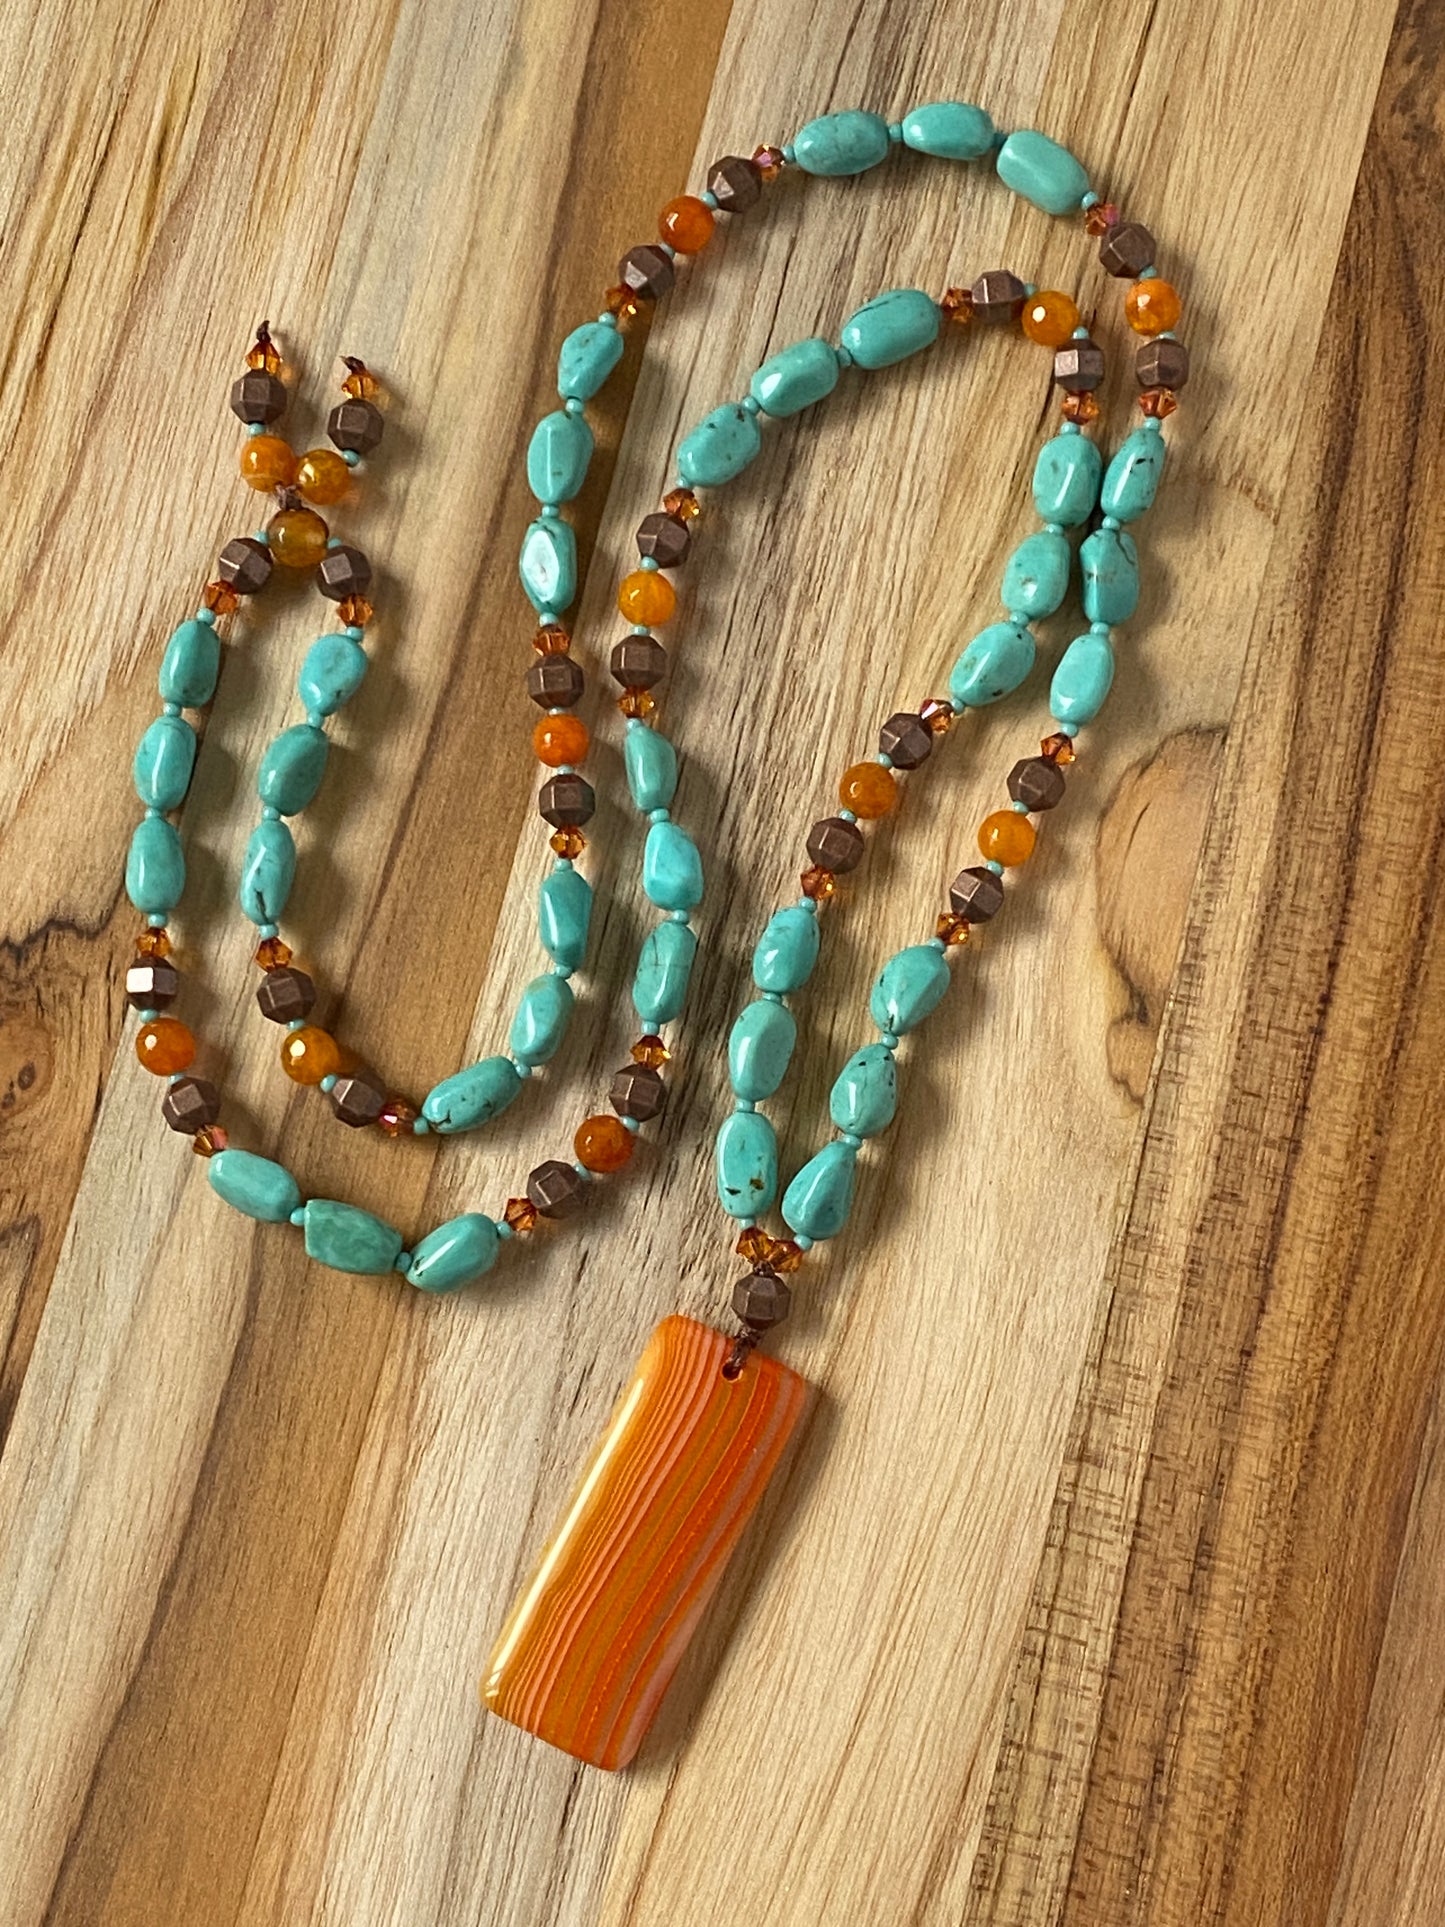 30" Long Orange Agate Pendant Beaded Necklace with Natural Turquoise, Agate & Crystal Beads My Urban Gems